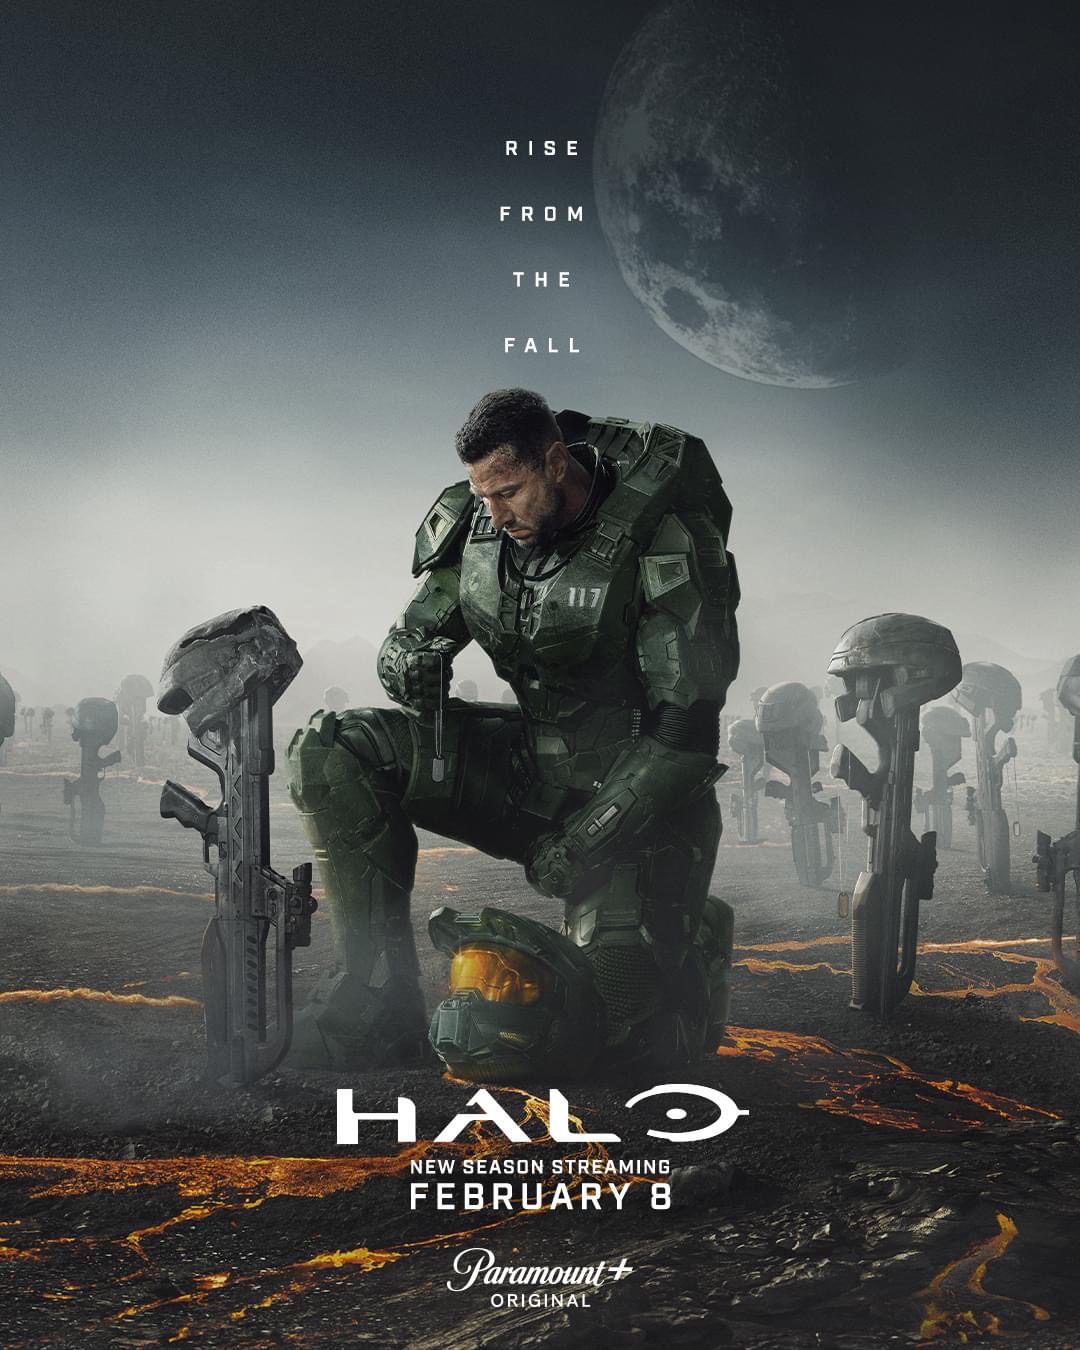 Halo TV series off to a rocky start, Episode 1 fails to please fans of the  games.